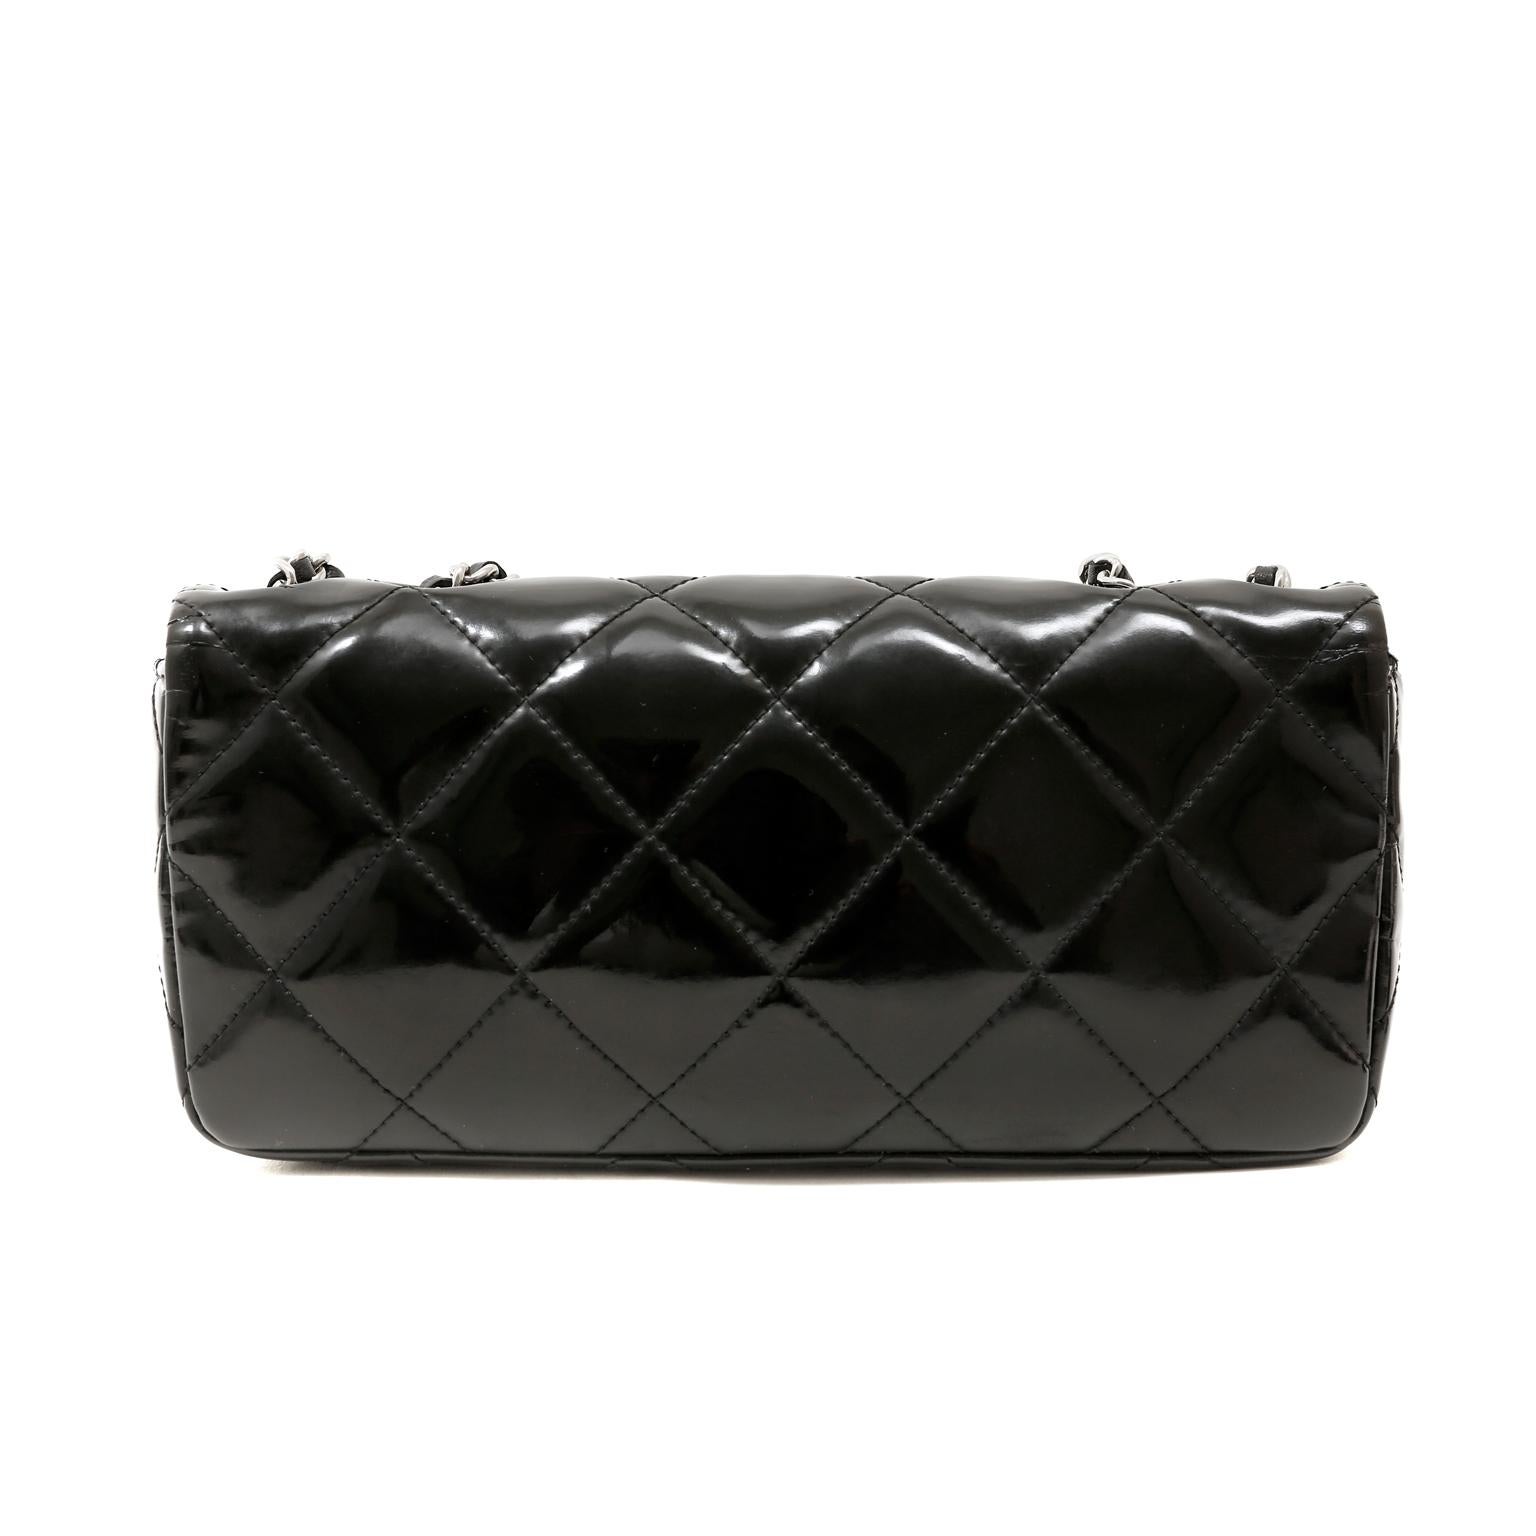 This authentic Chanel Black Patent East West Reissue Flap Bag is in very good condition.  Just the right size for day or evening, this versatile Chanel adds dimension to any wardrobe.  
Black weather friendly patent leather is quilted in signature